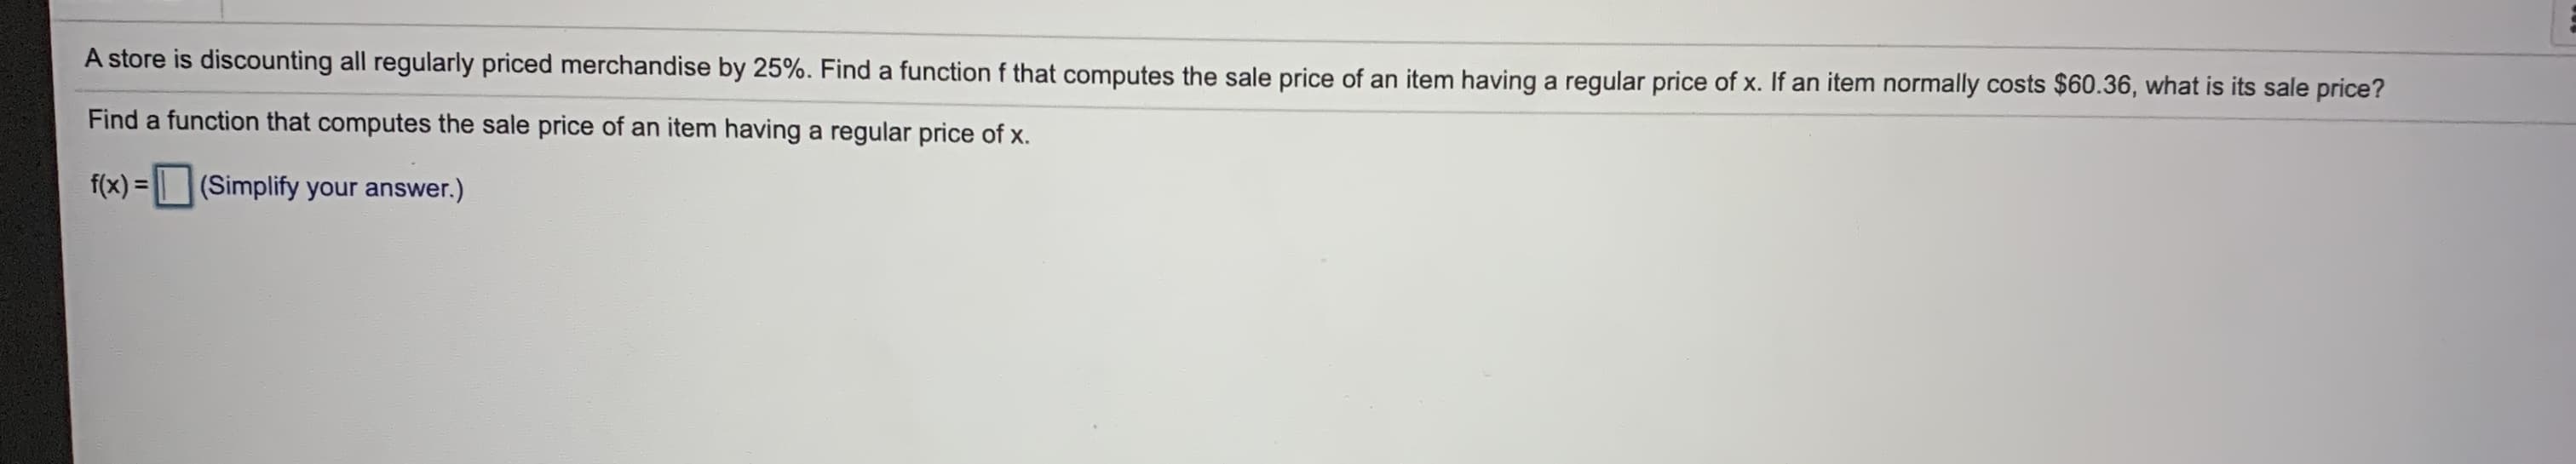 A store is discounting all regularly priced merchandise by 25%. Find a function f that computes the sale price of an item having a regular price of x. If an item normally costs $60.36, what is its sale price?
